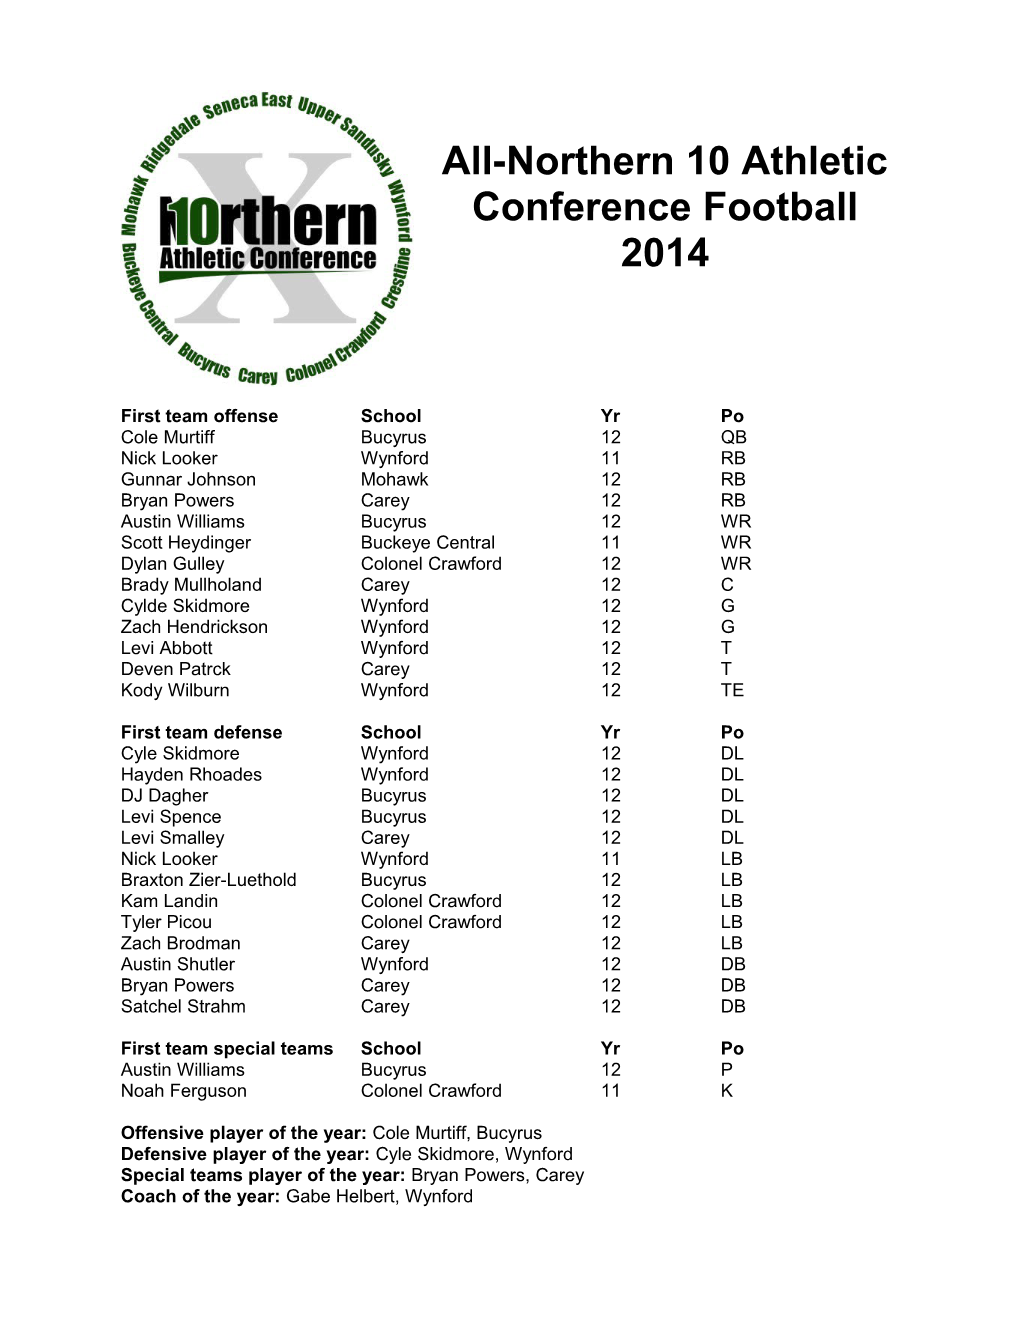 All-Northern 10 Athletic Conference Football 2014